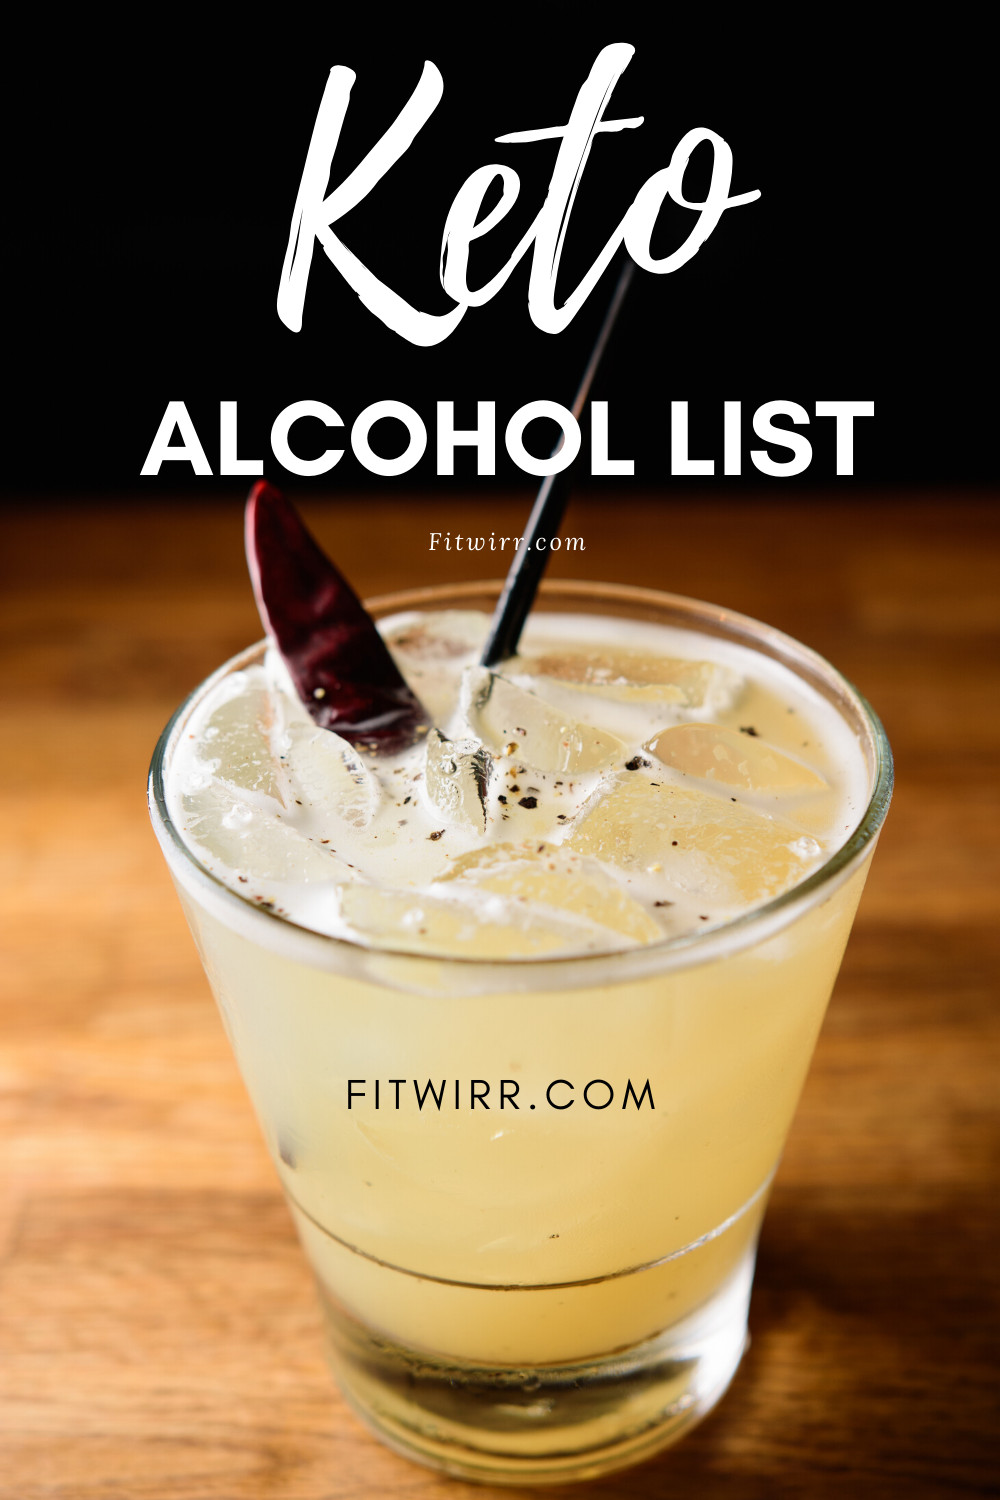 Summer Keto Drinks Alcohol
 Keto Alcohol 33 Low Carb Alcohol Drinks to Keep You in